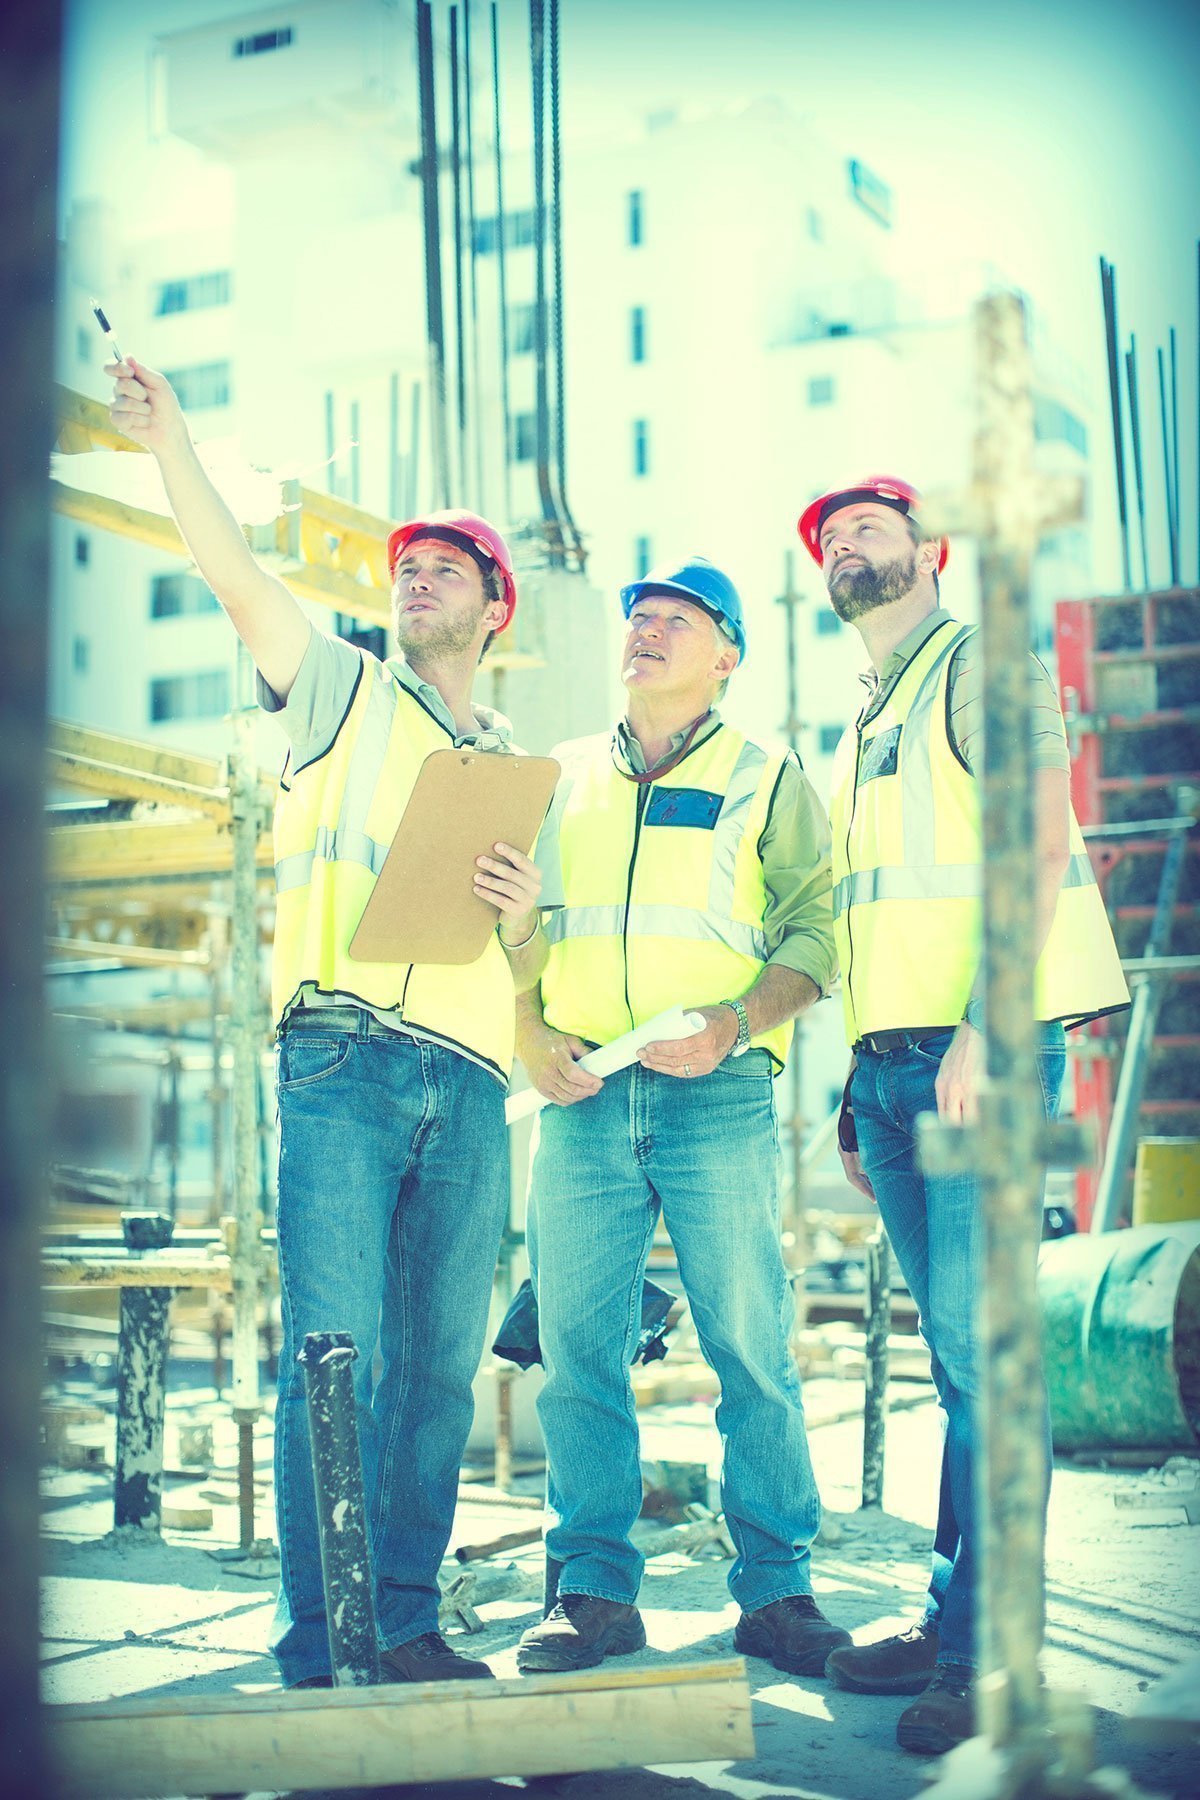 Image of two men working on construction site